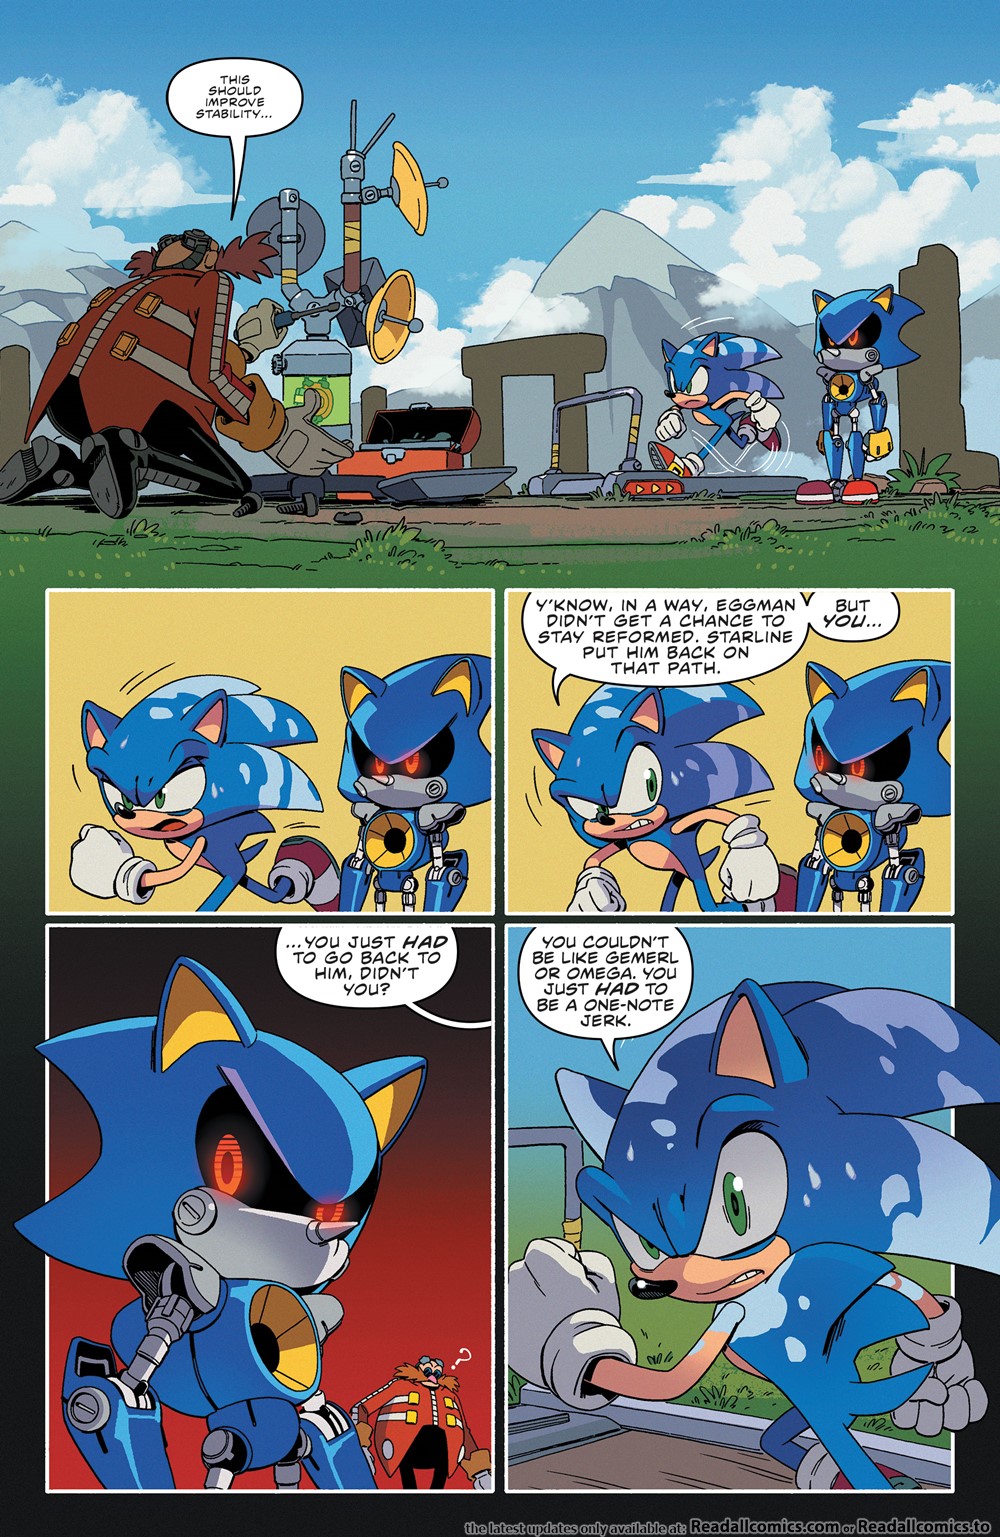 Sonic The Hedgehog 026 2020 Read Sonic The Hedgehog 026 2020 Comic Online In High Quality